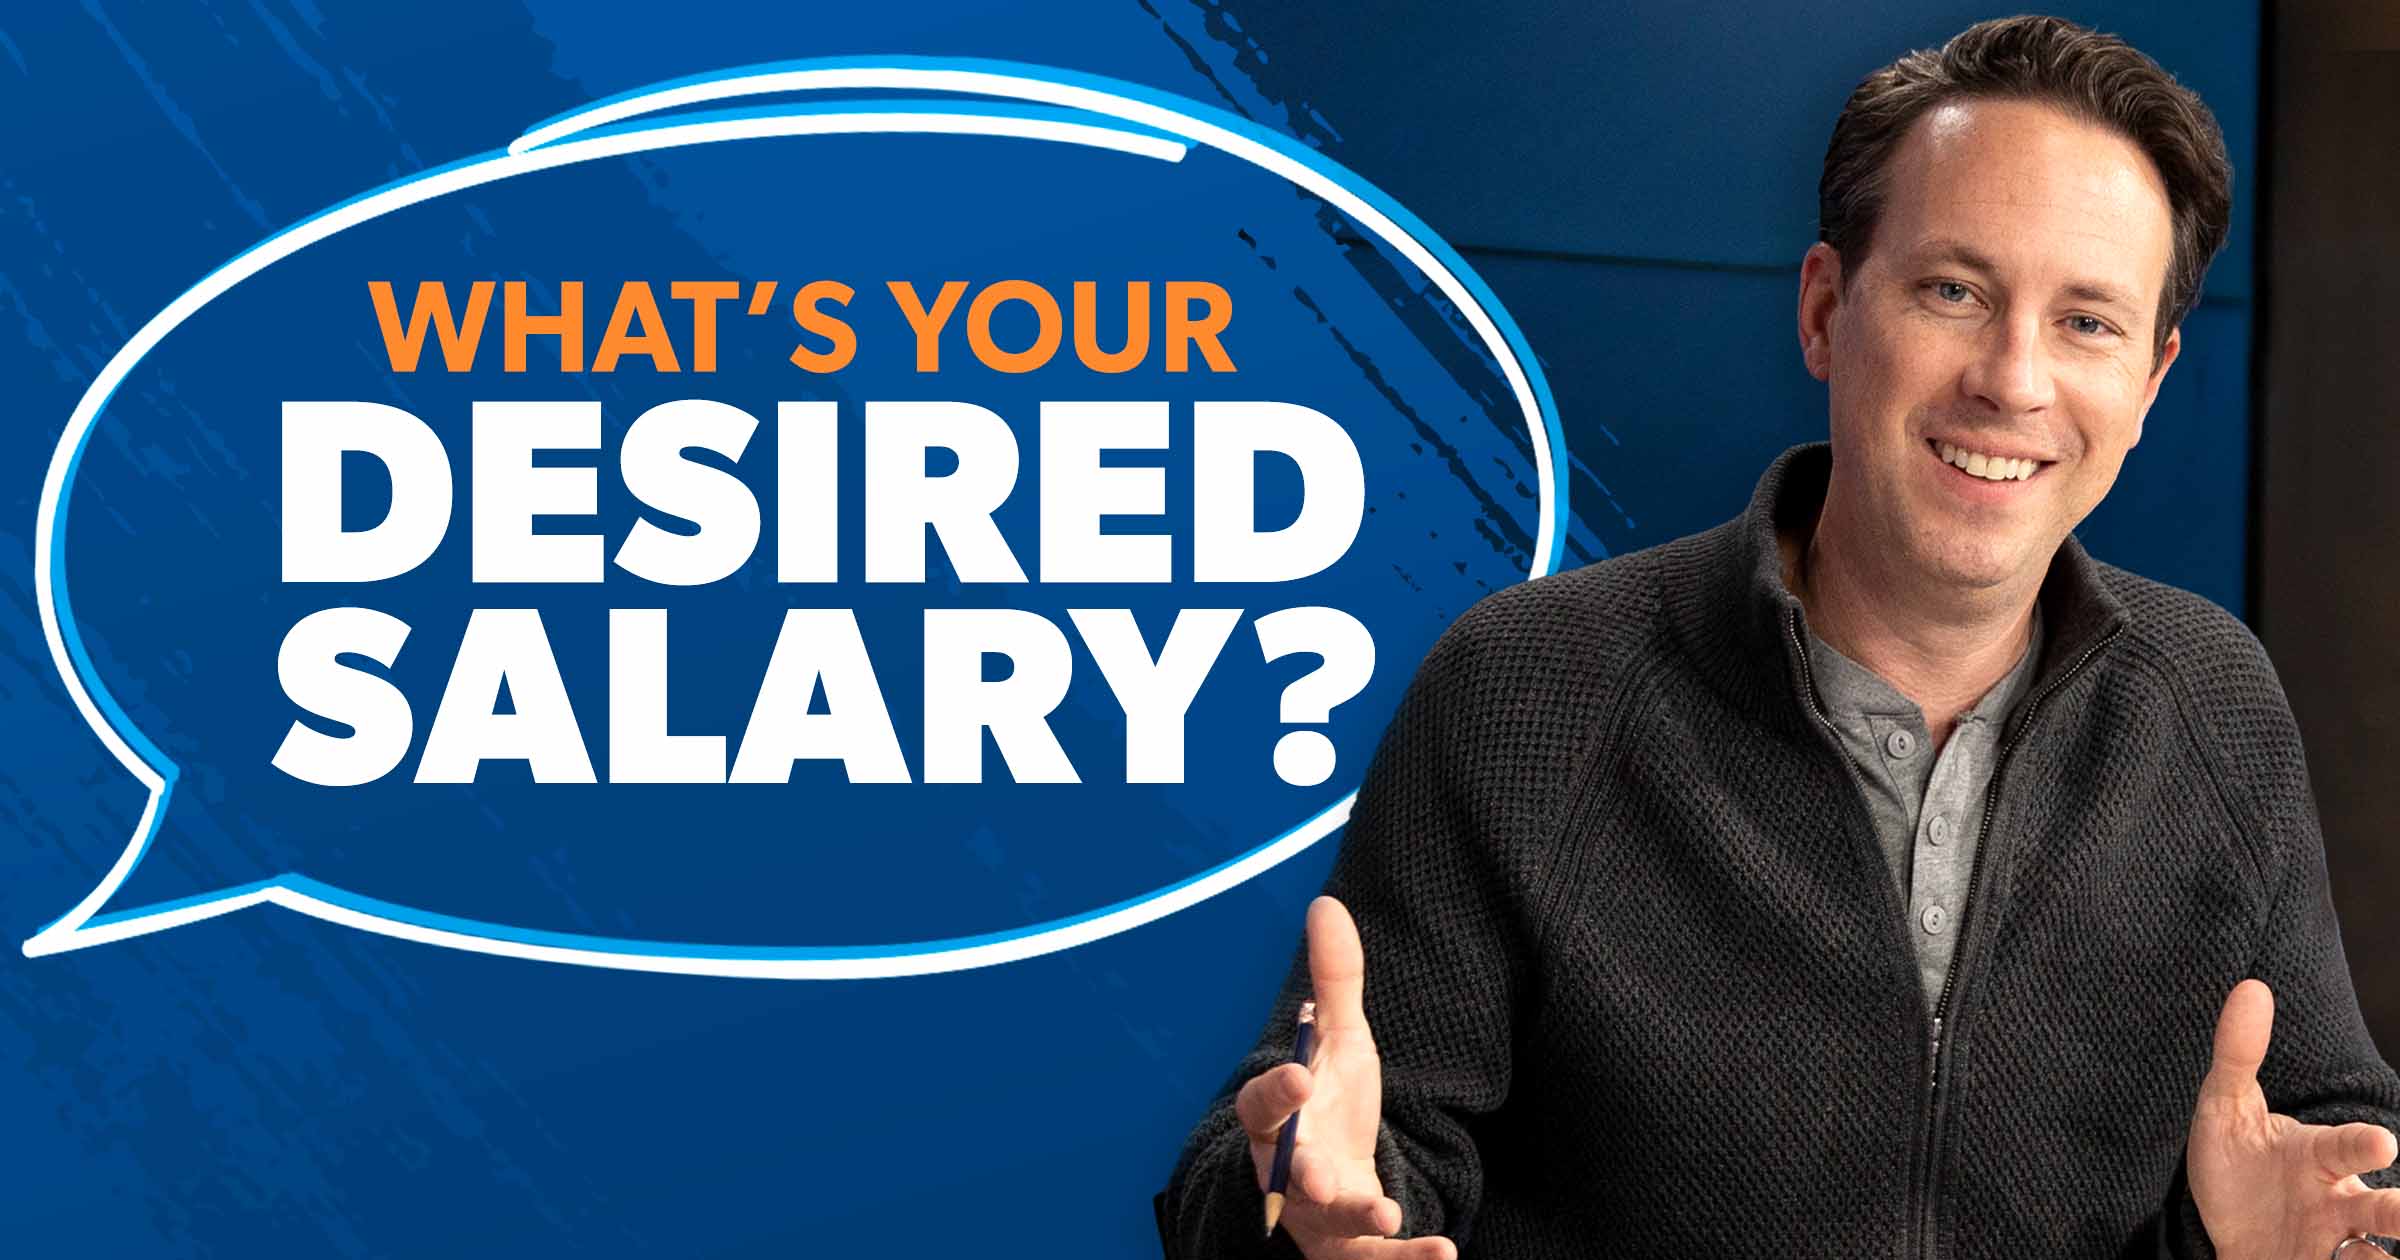 What Is Your Desired Salary?